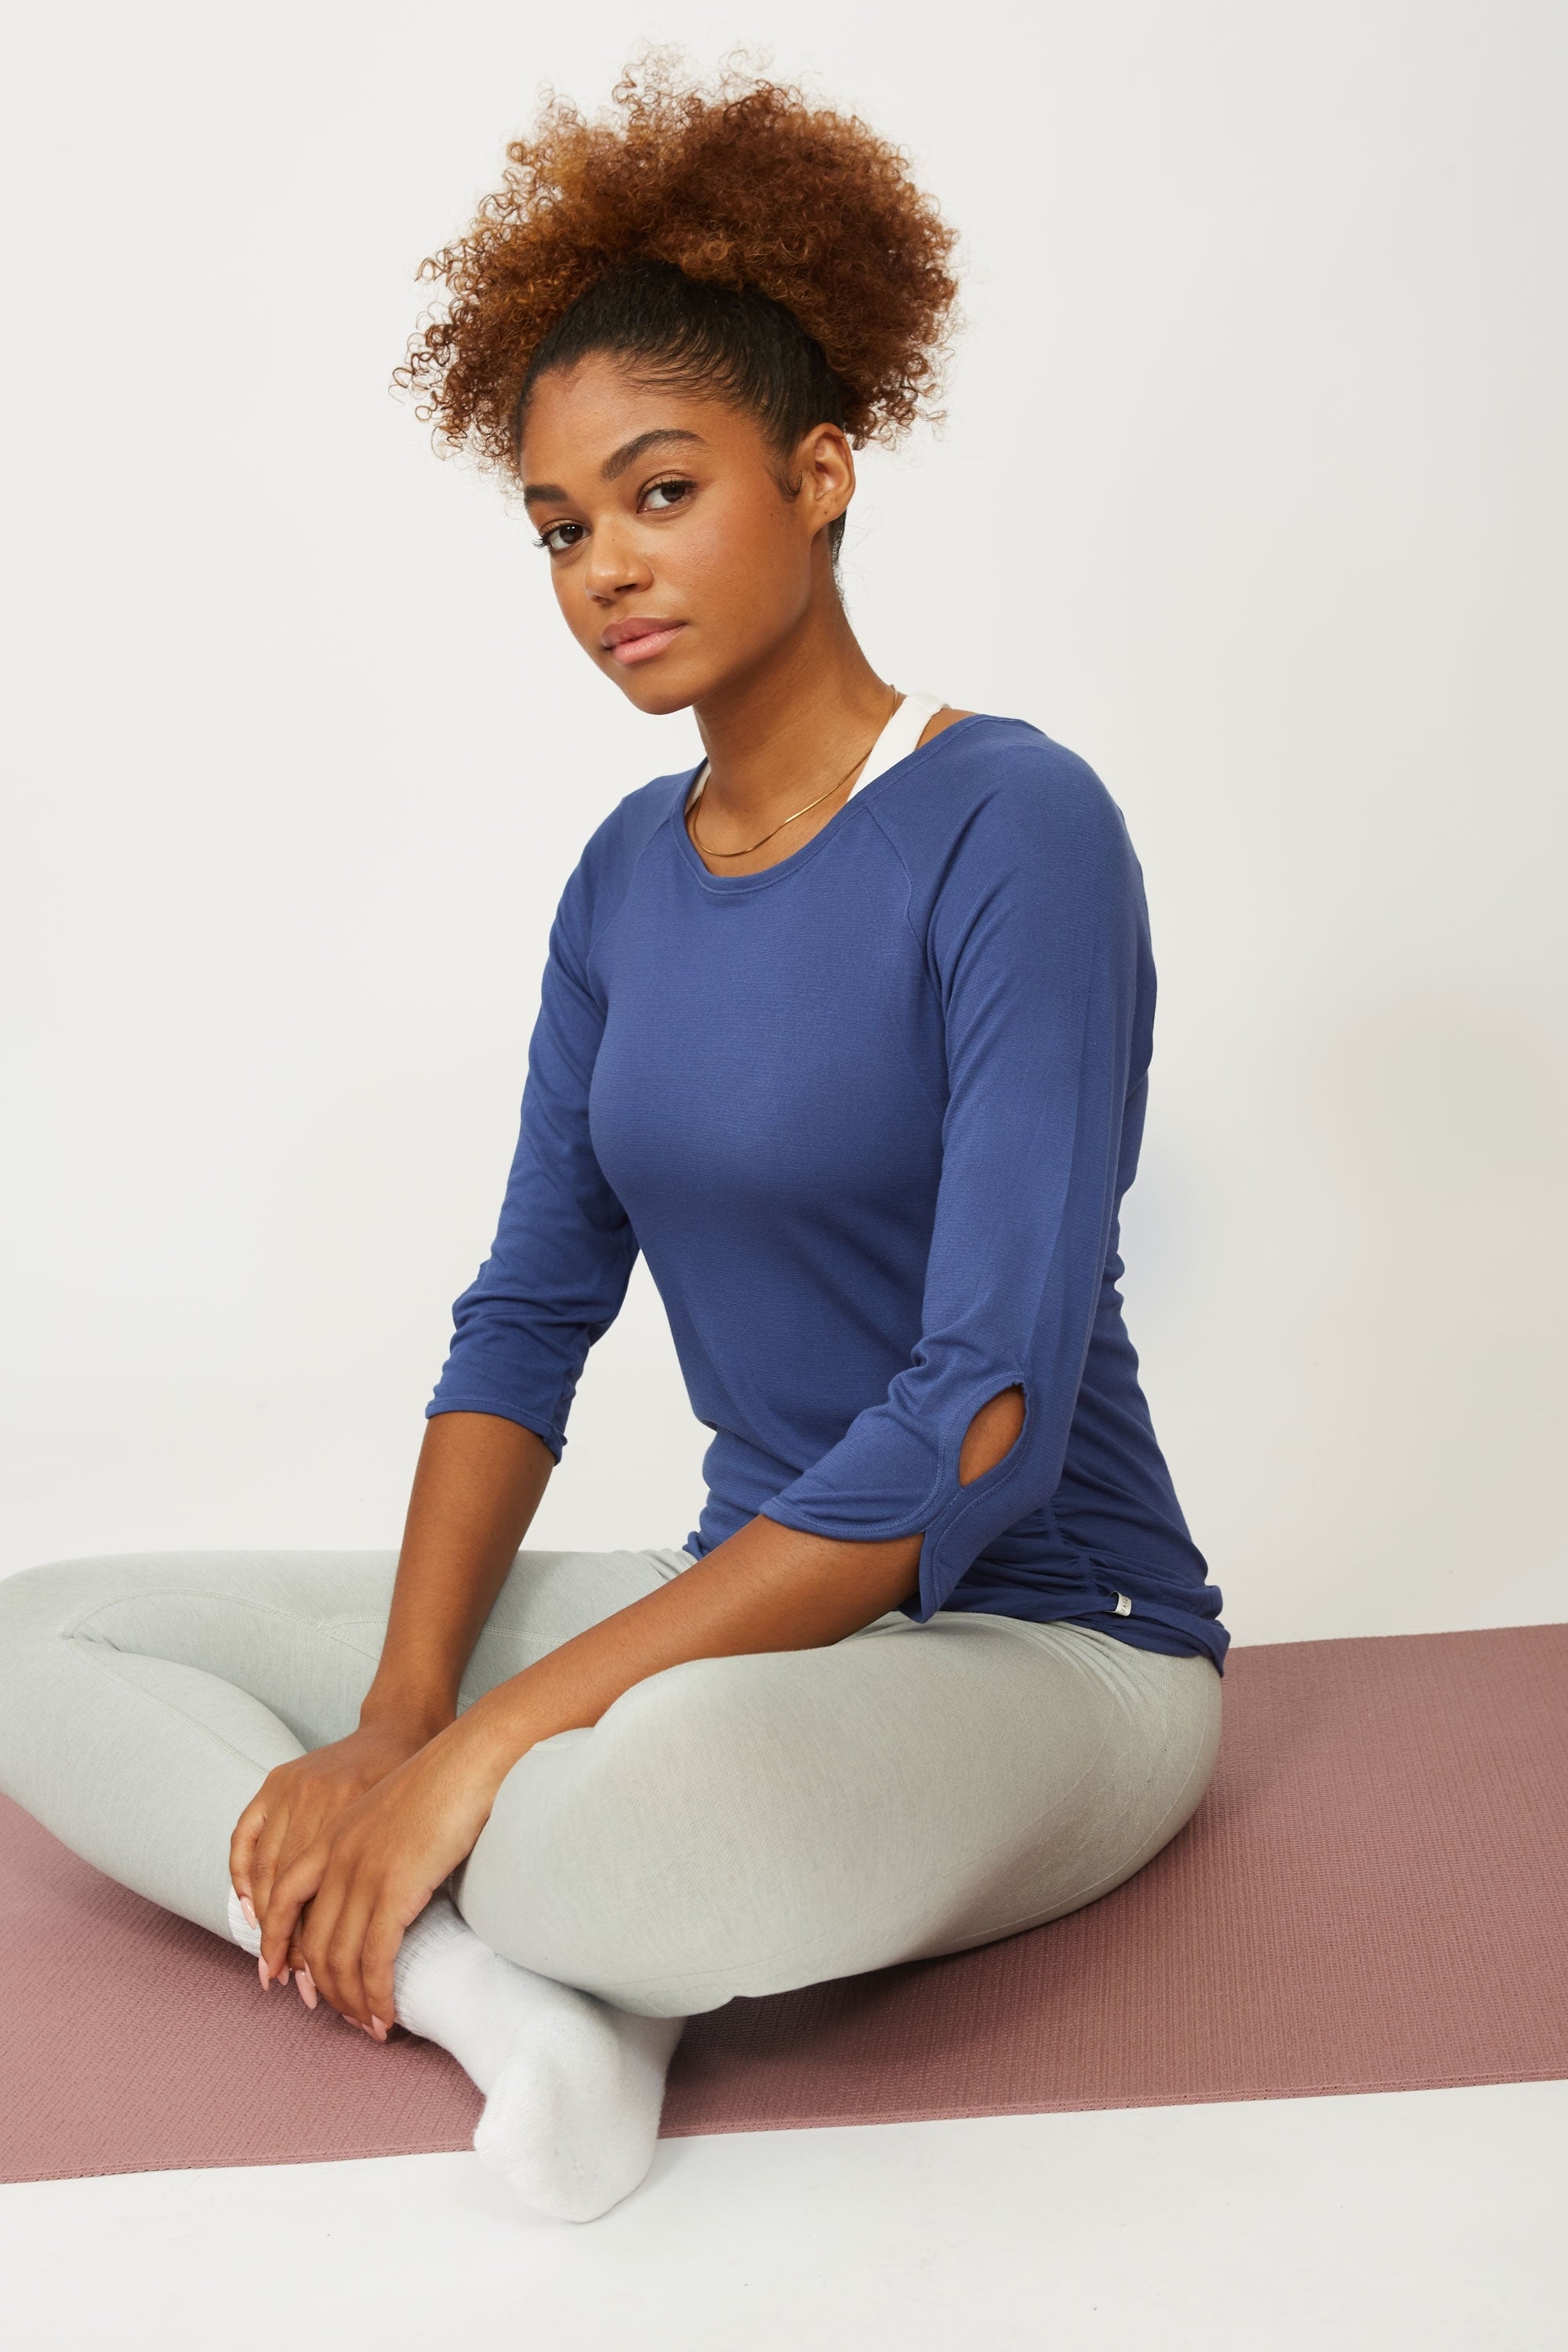 Denim blue bamboo long sleeve top and grey leggings for yoga, pilates, barre and running from sustainable activewear brand, Jilla Active